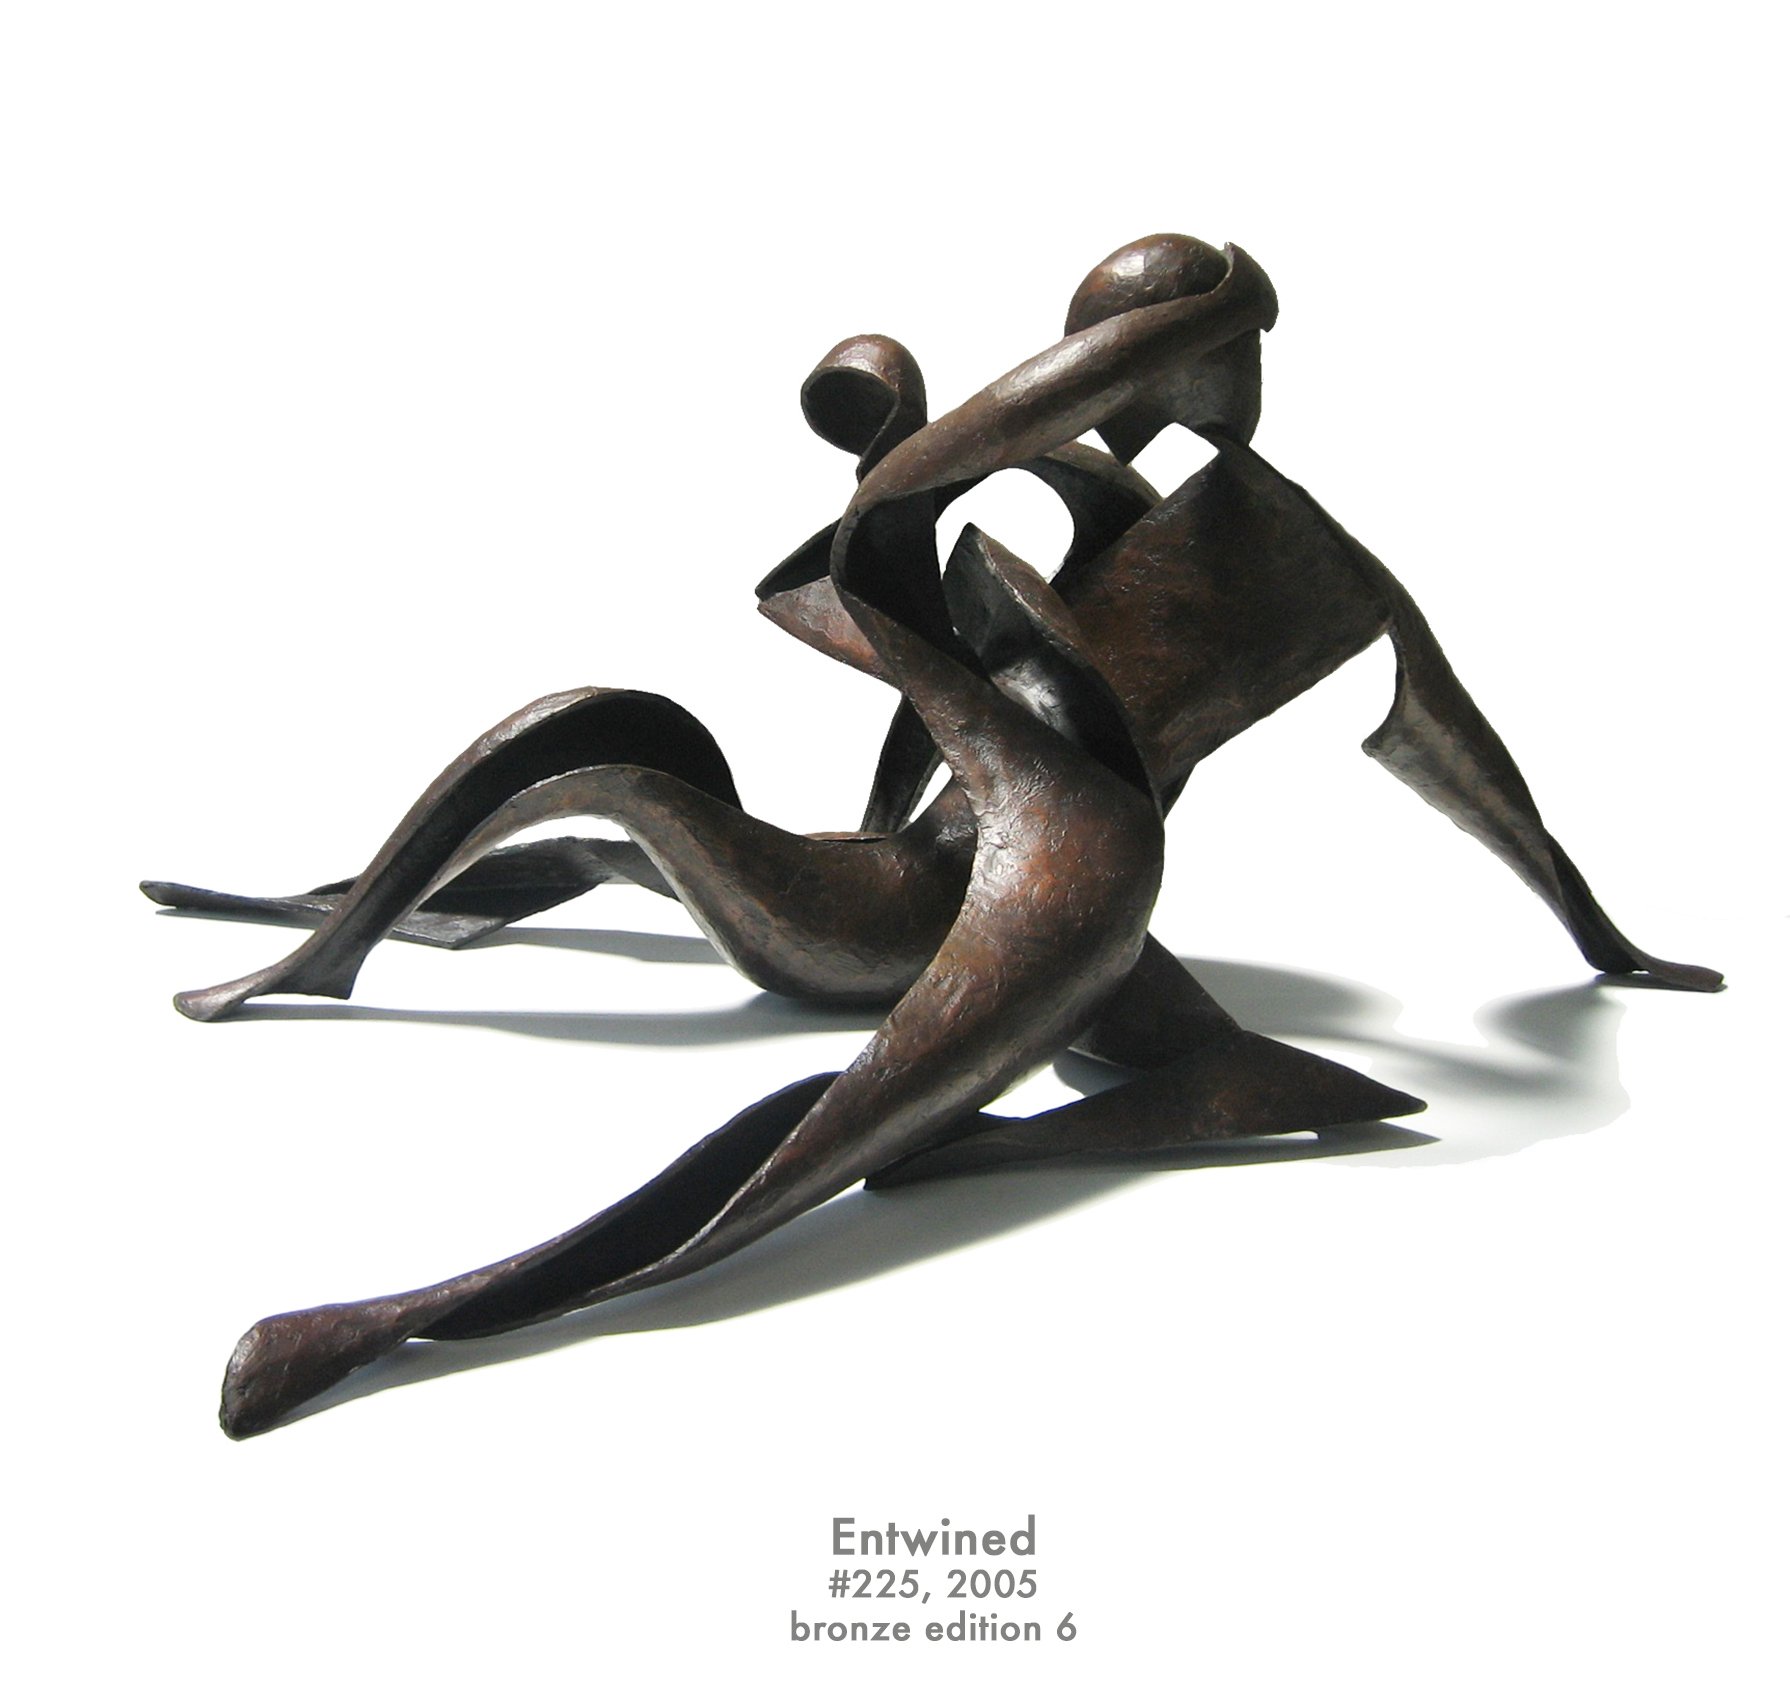 Entwined, 2005, bronze, #225